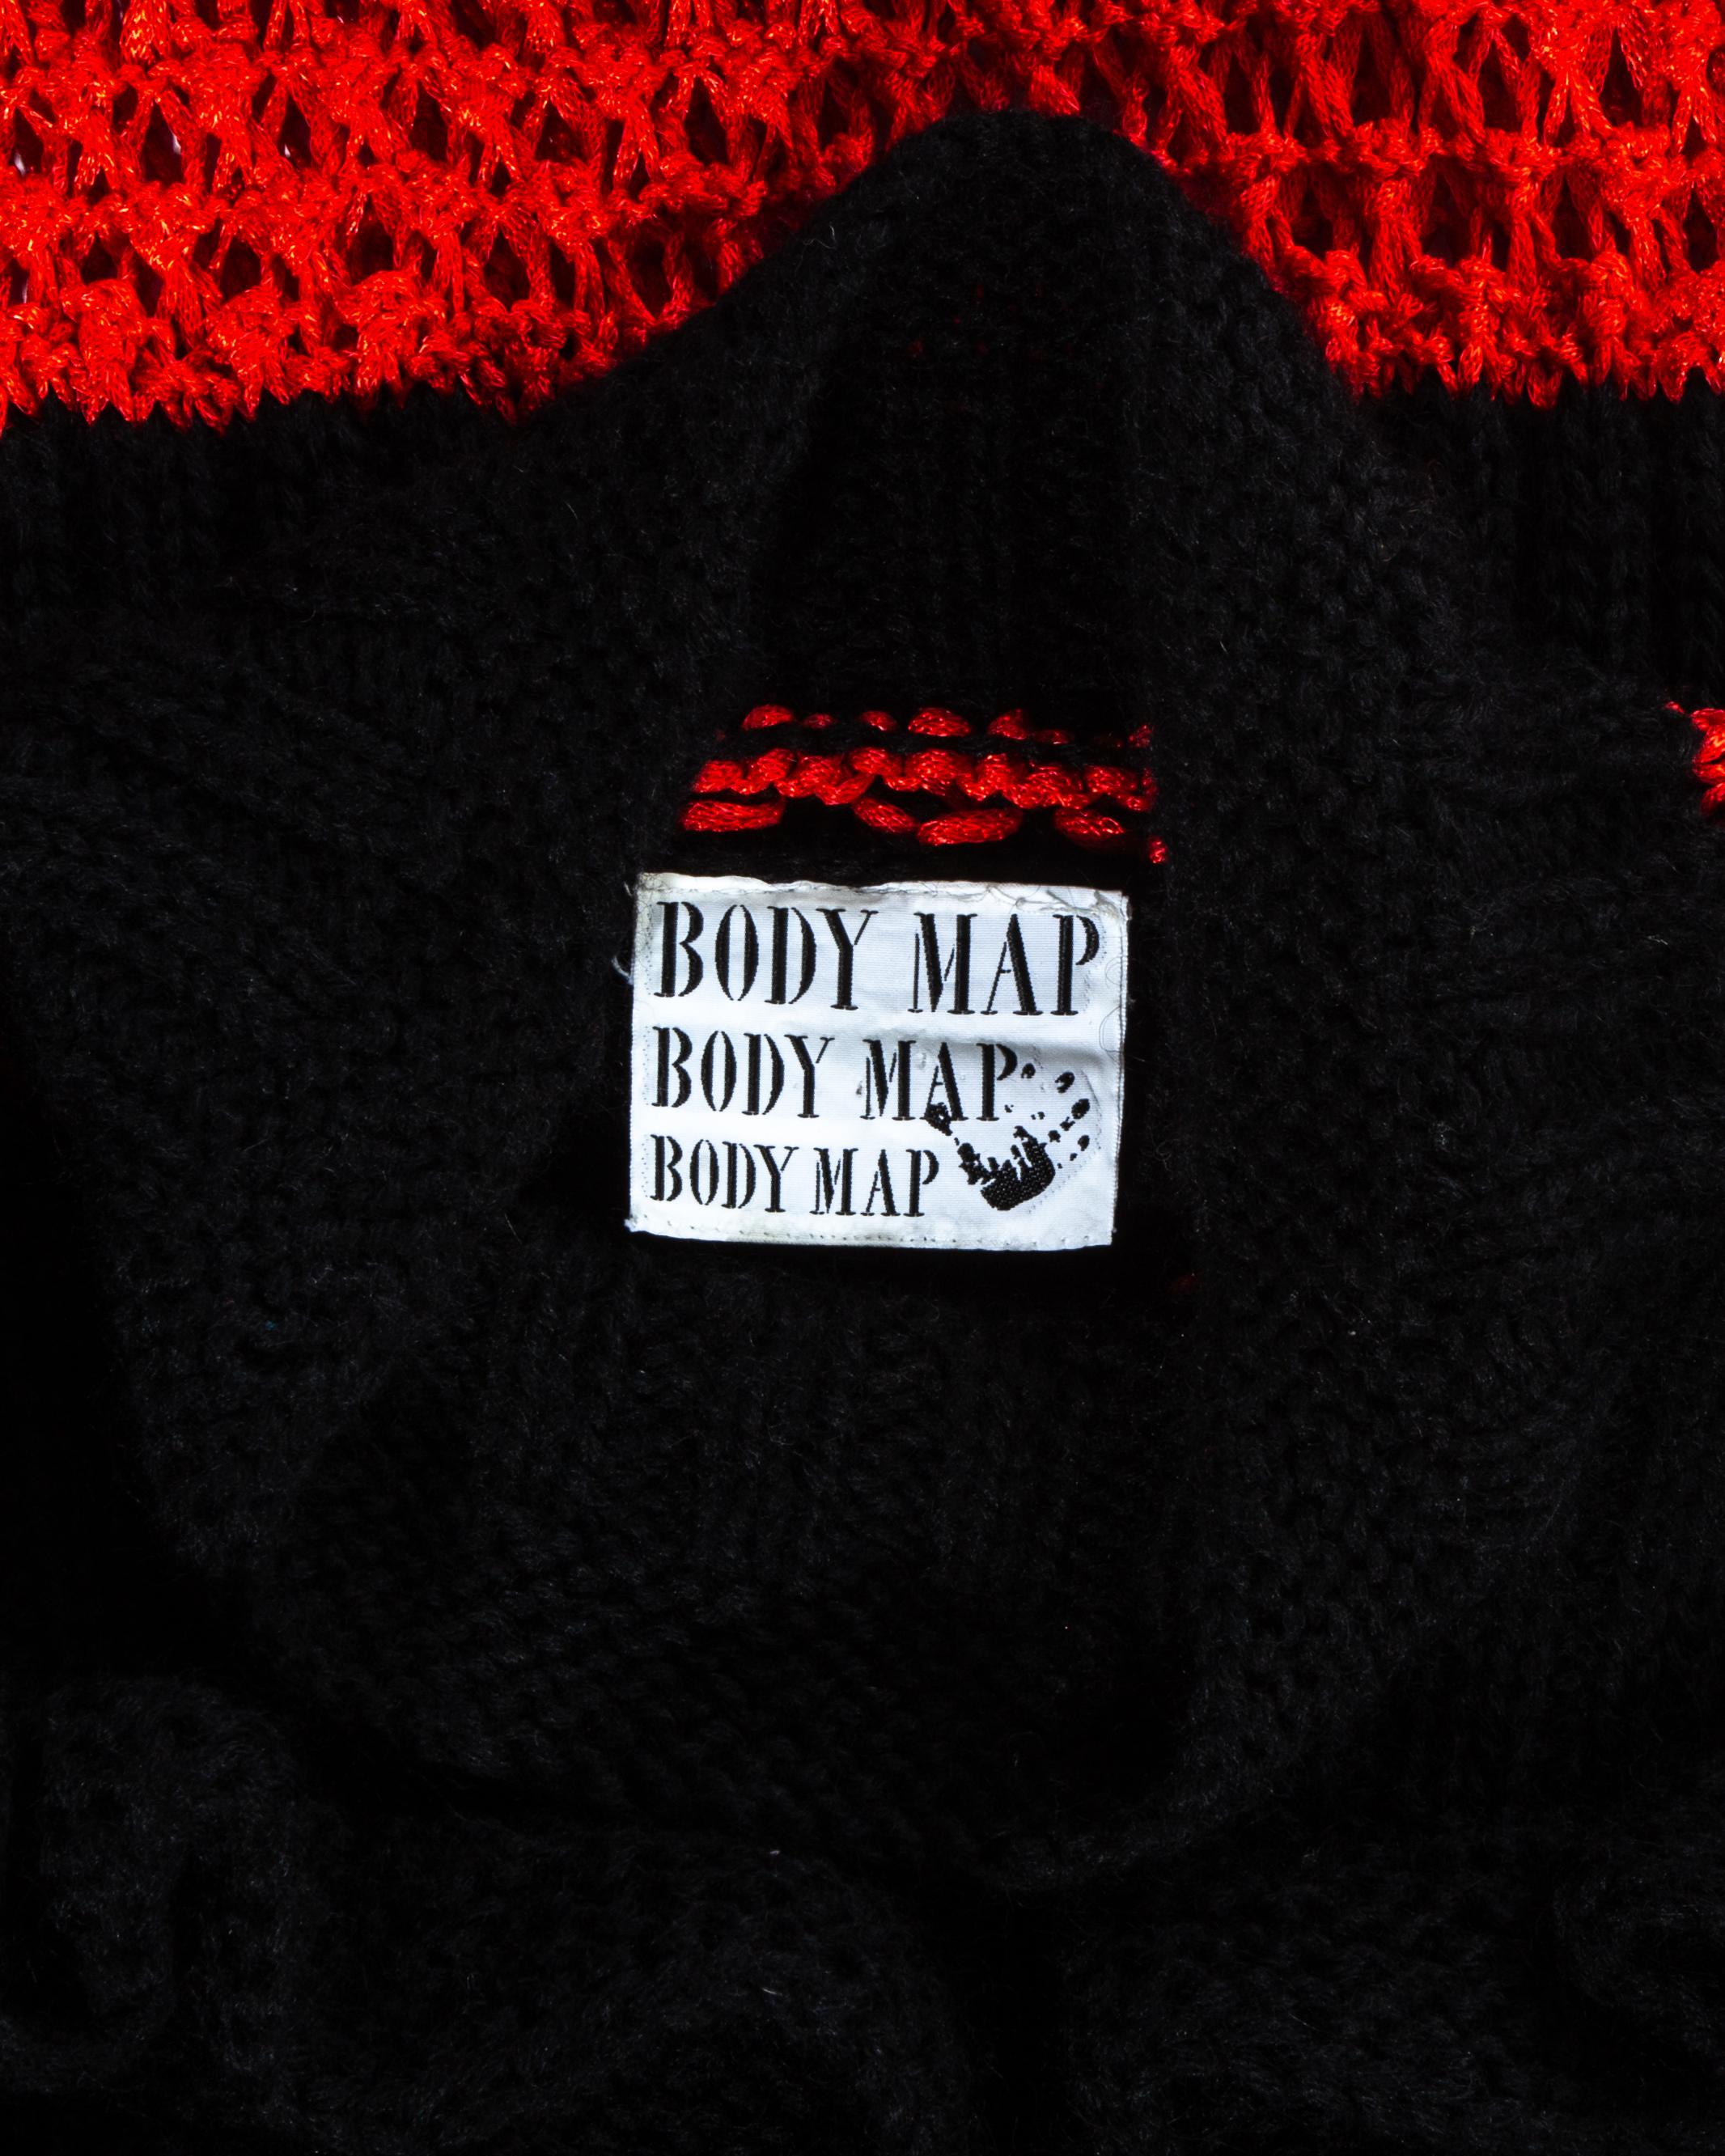 Women's BodyMap red and black knitted dress, fw 1985 For Sale